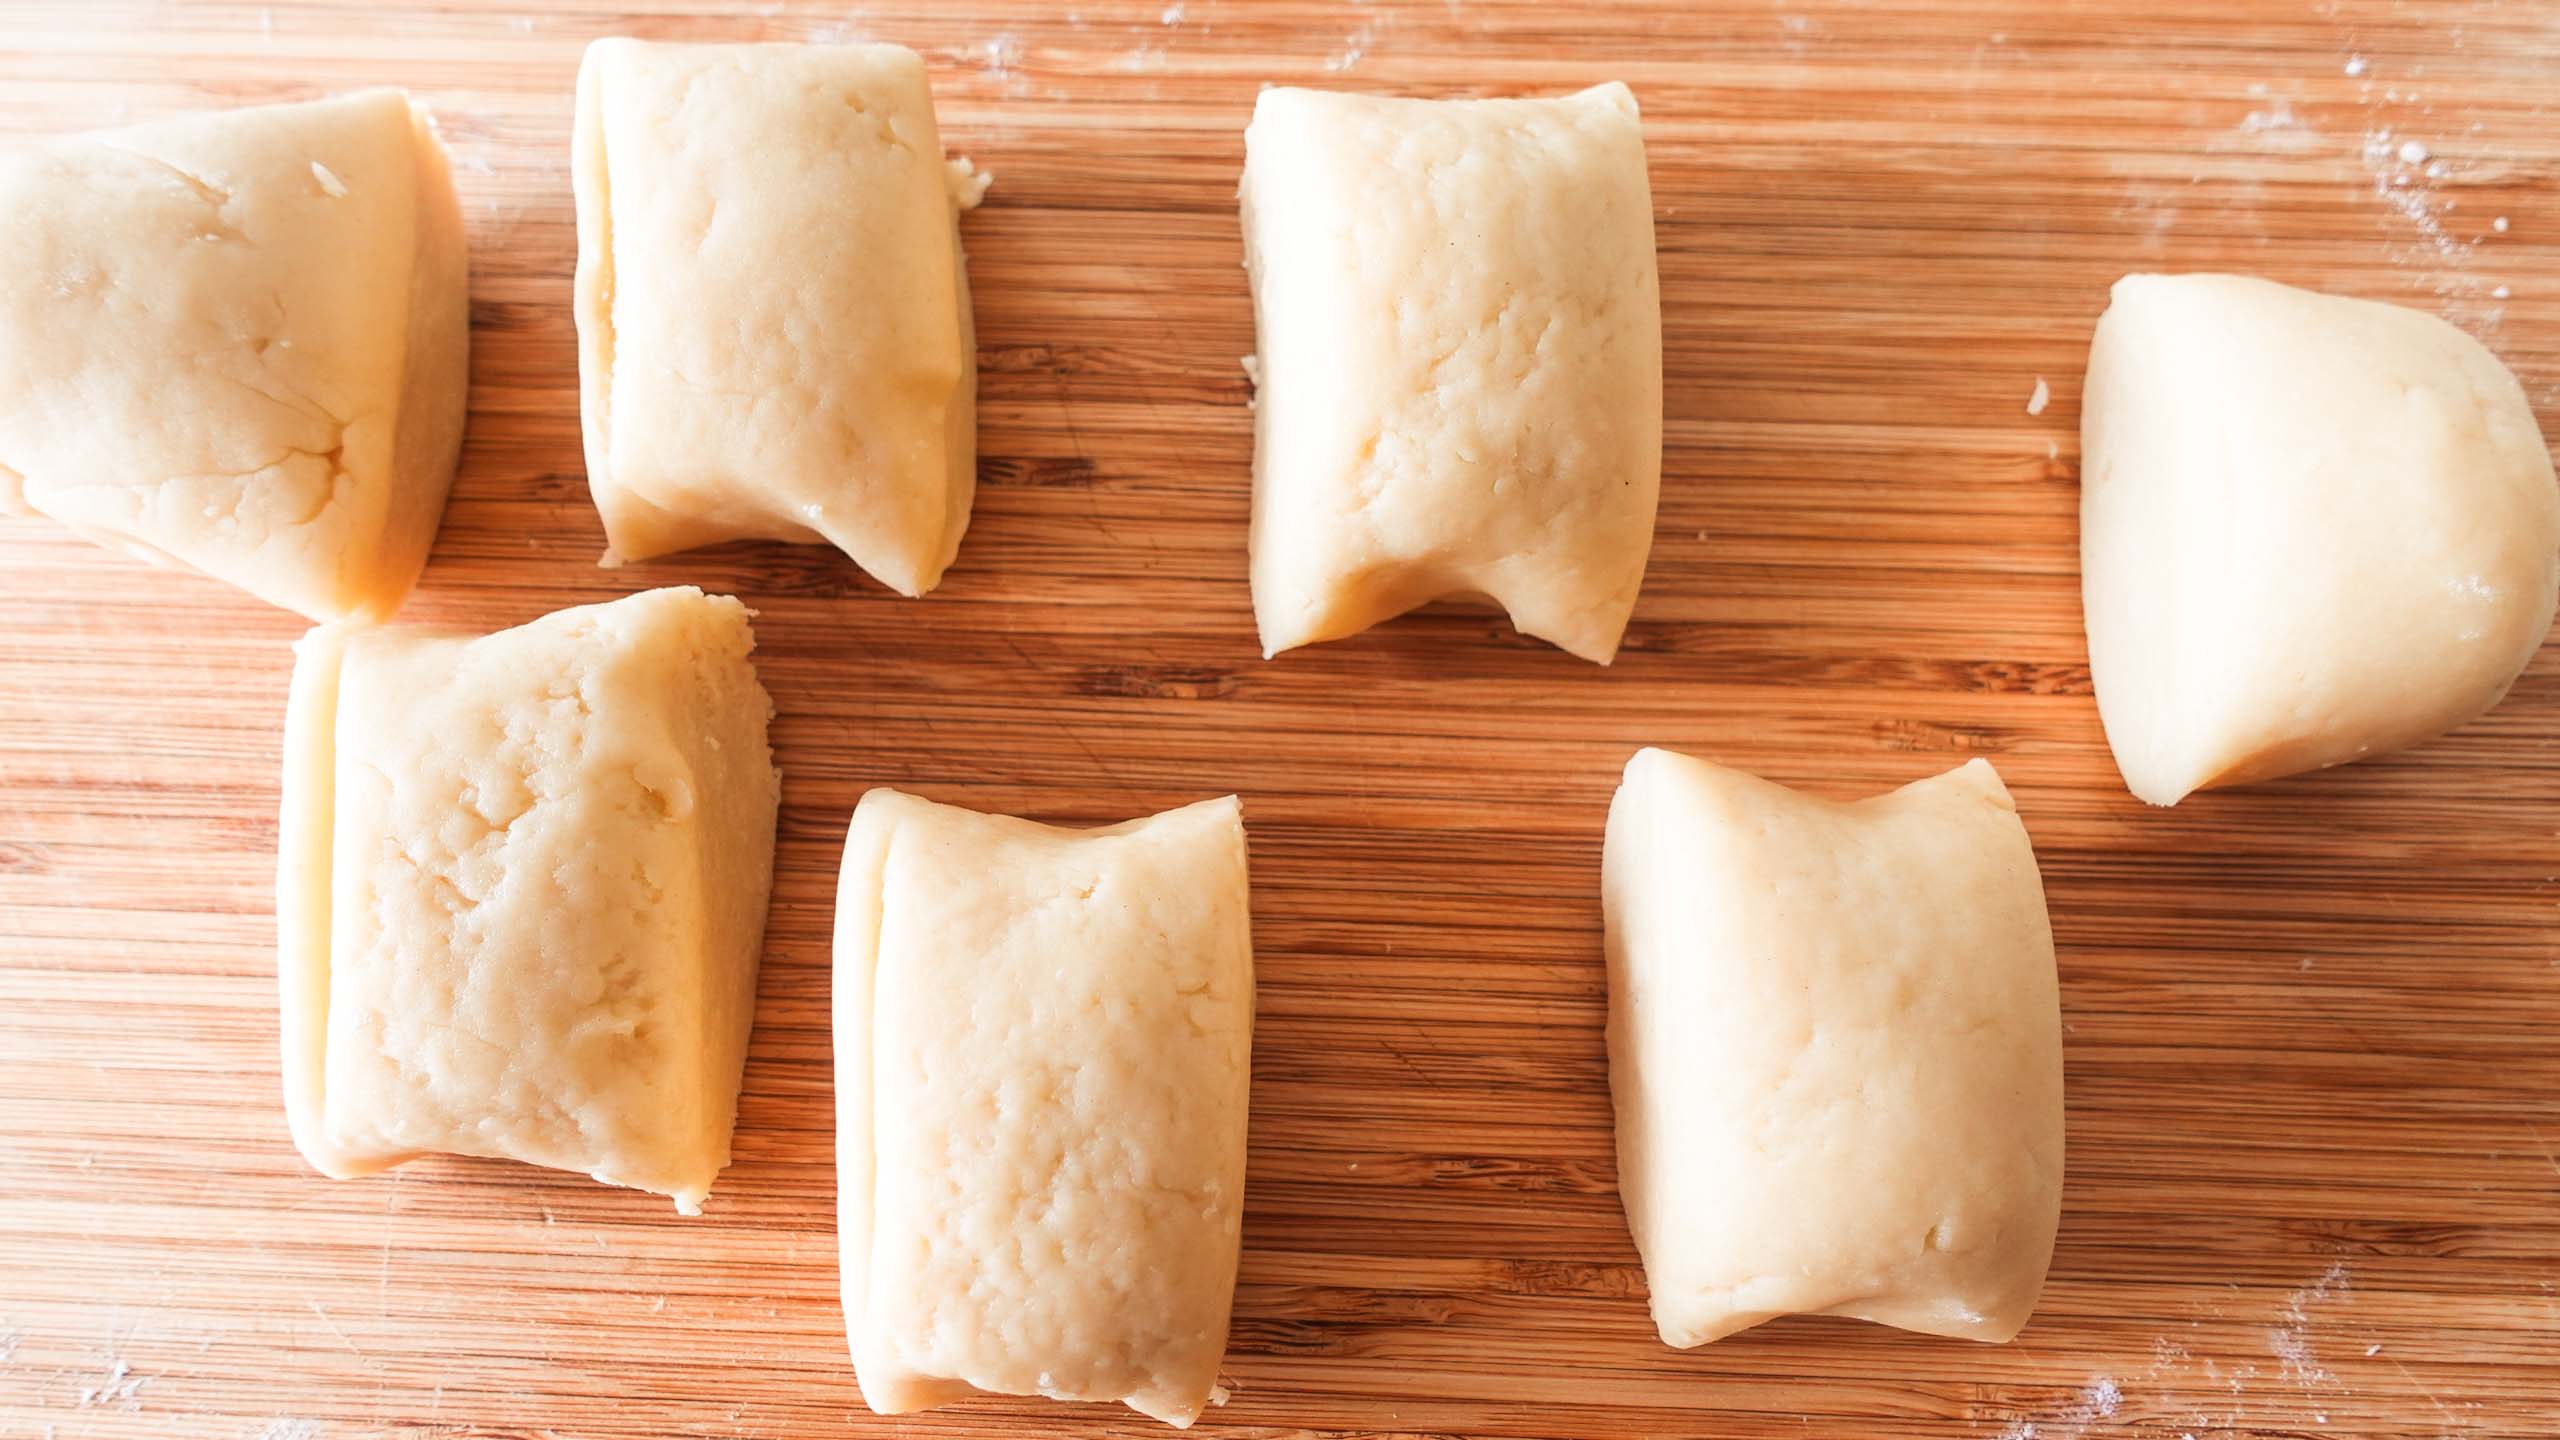 Ready Puff Pastry dough